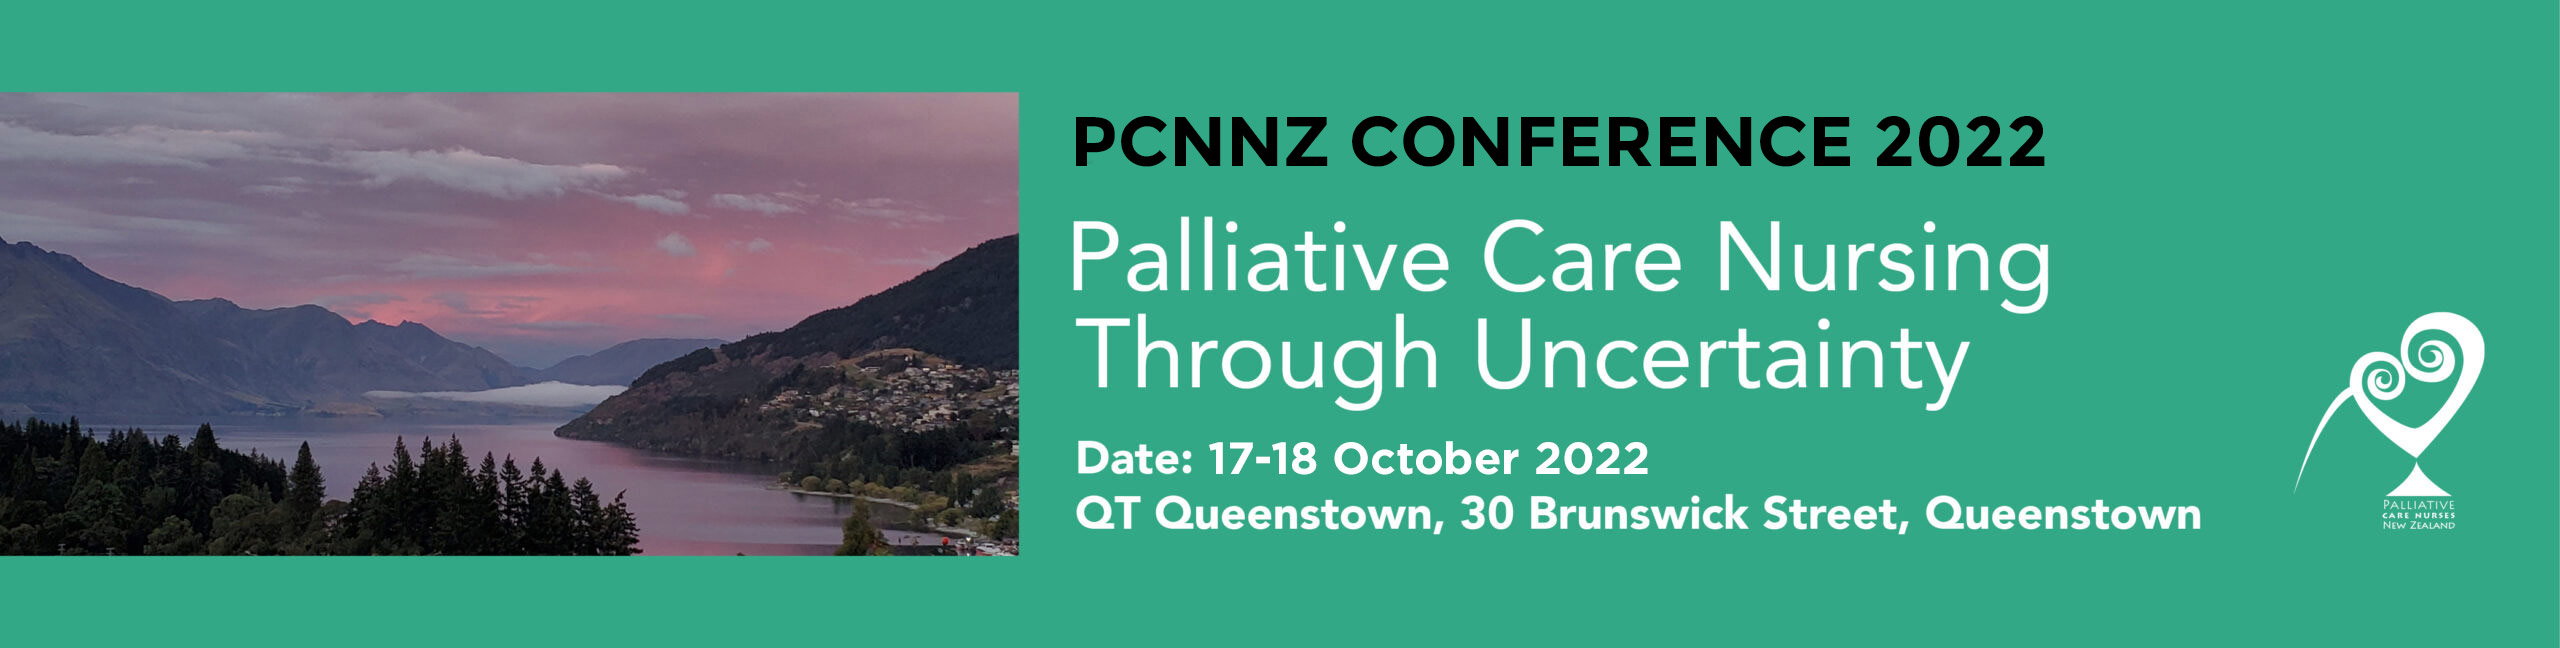 PCNNZ Conference 2022